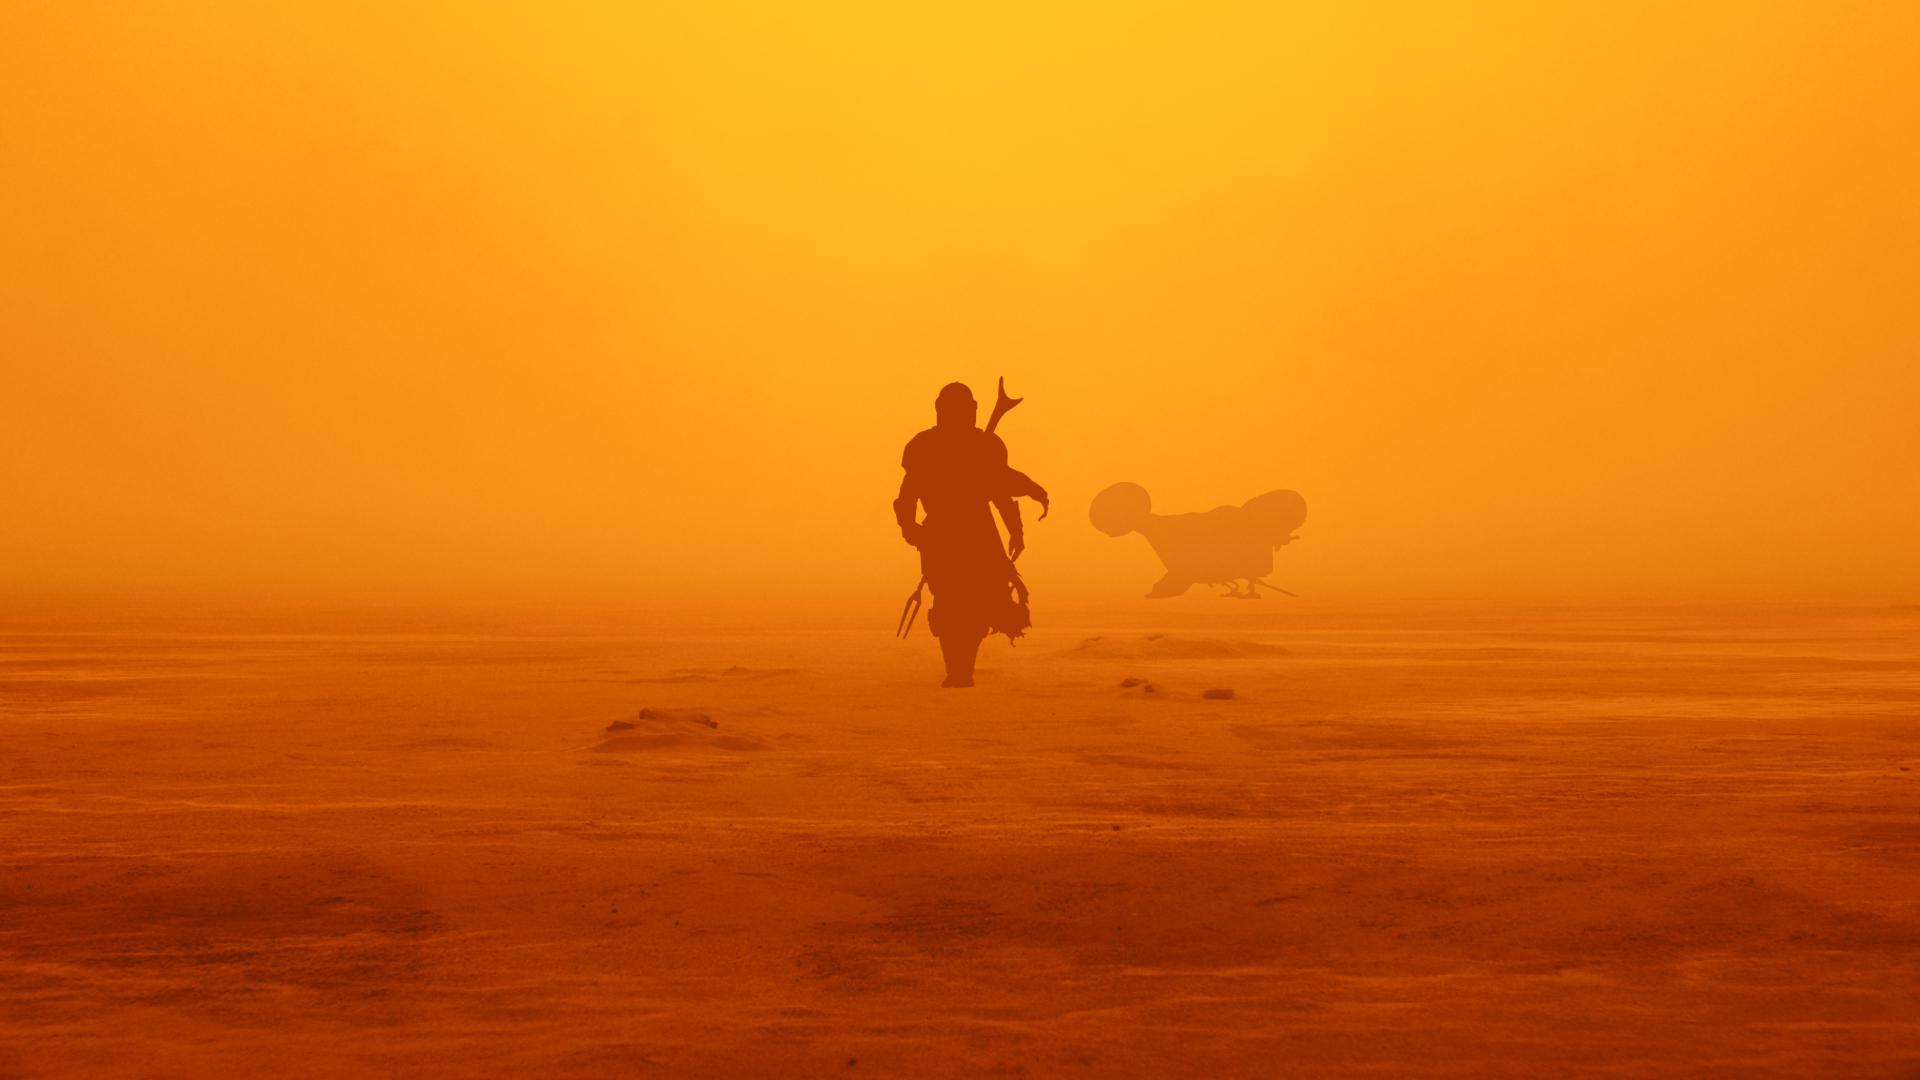 The Mandalorian Blade Runner 2049 Wallpaper I Made Now With Added Razor Crest